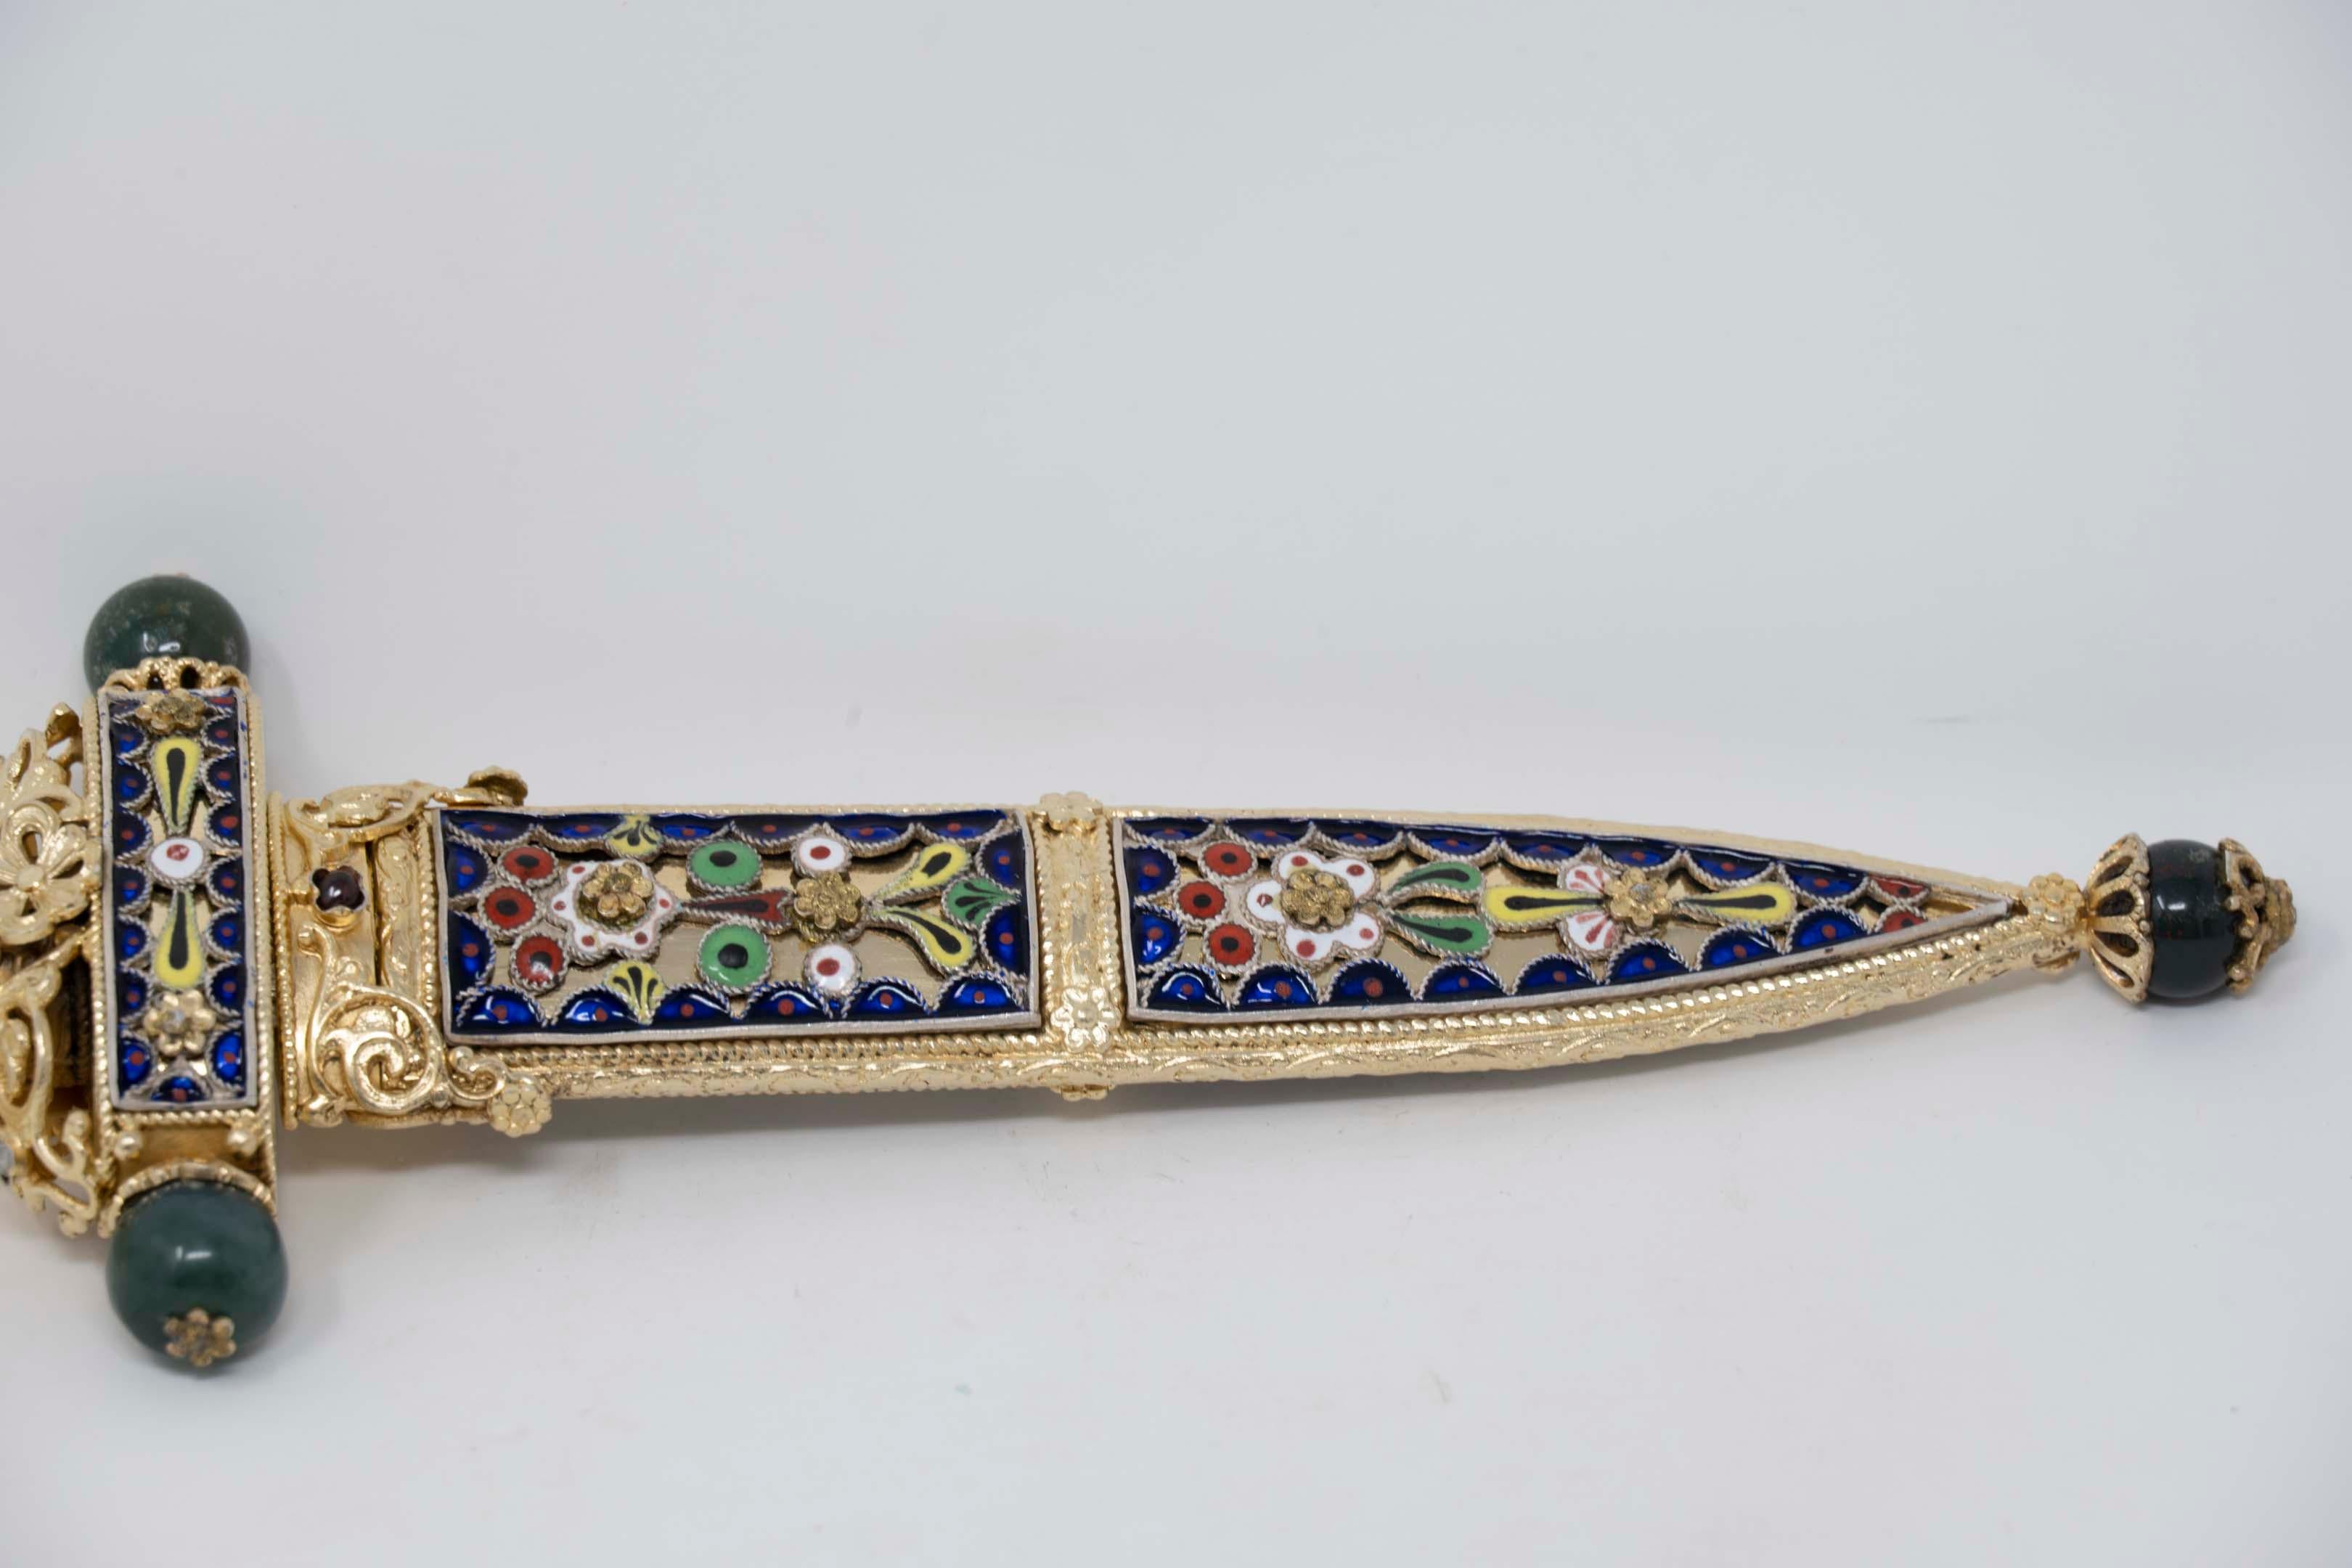 Vintage Faberge style 925 silver marked, letter opener with encrusted jewels jade, turquoise, garnet, enamel and moonstone. Made in the shape of a dagger in a scabbard measures 9 inches long. In excellent condition, blade shows very minor tarnish on